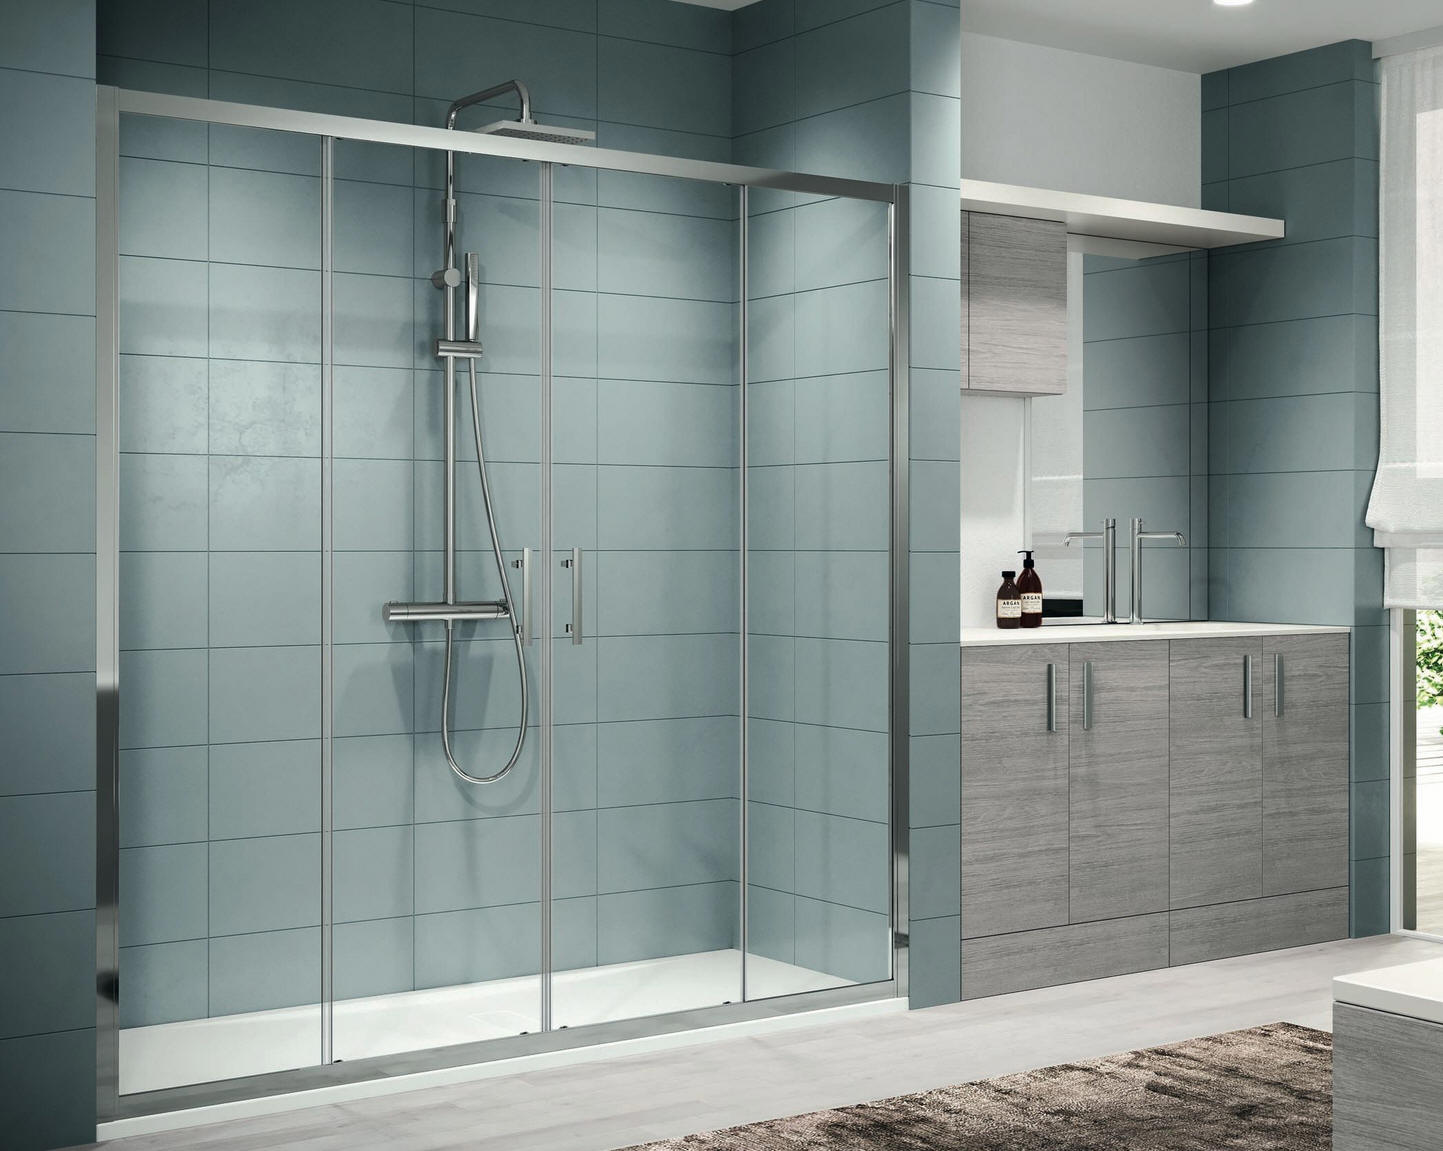 Novellini ZEPHYROS 2A extra wide shower enclosure comprising double sliding doors suitable for corner, mid-wall or alcove installation.